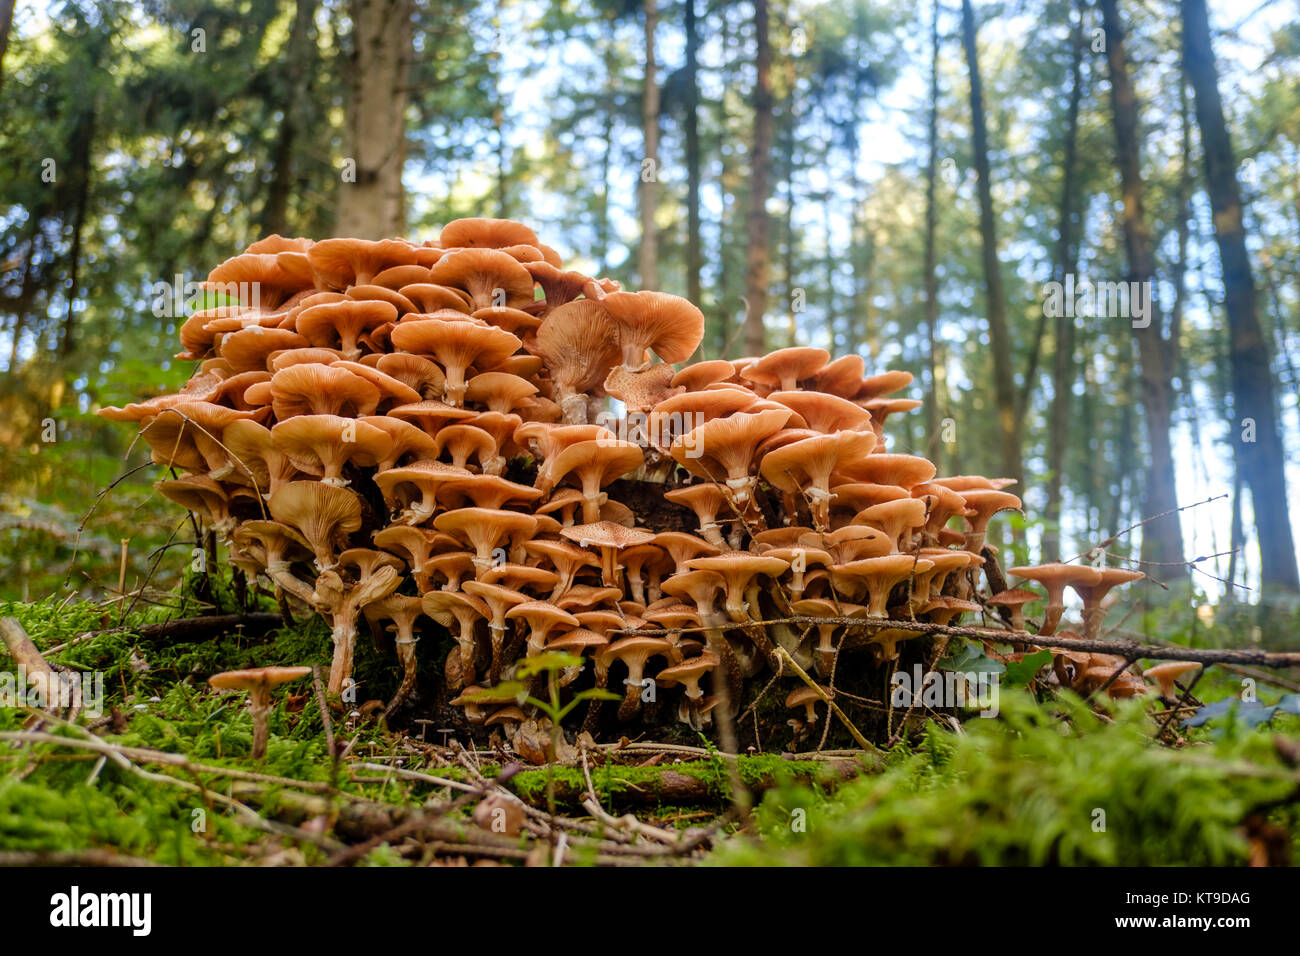 Group of mushrooms in a forest in early afternoon sun Stock Photo